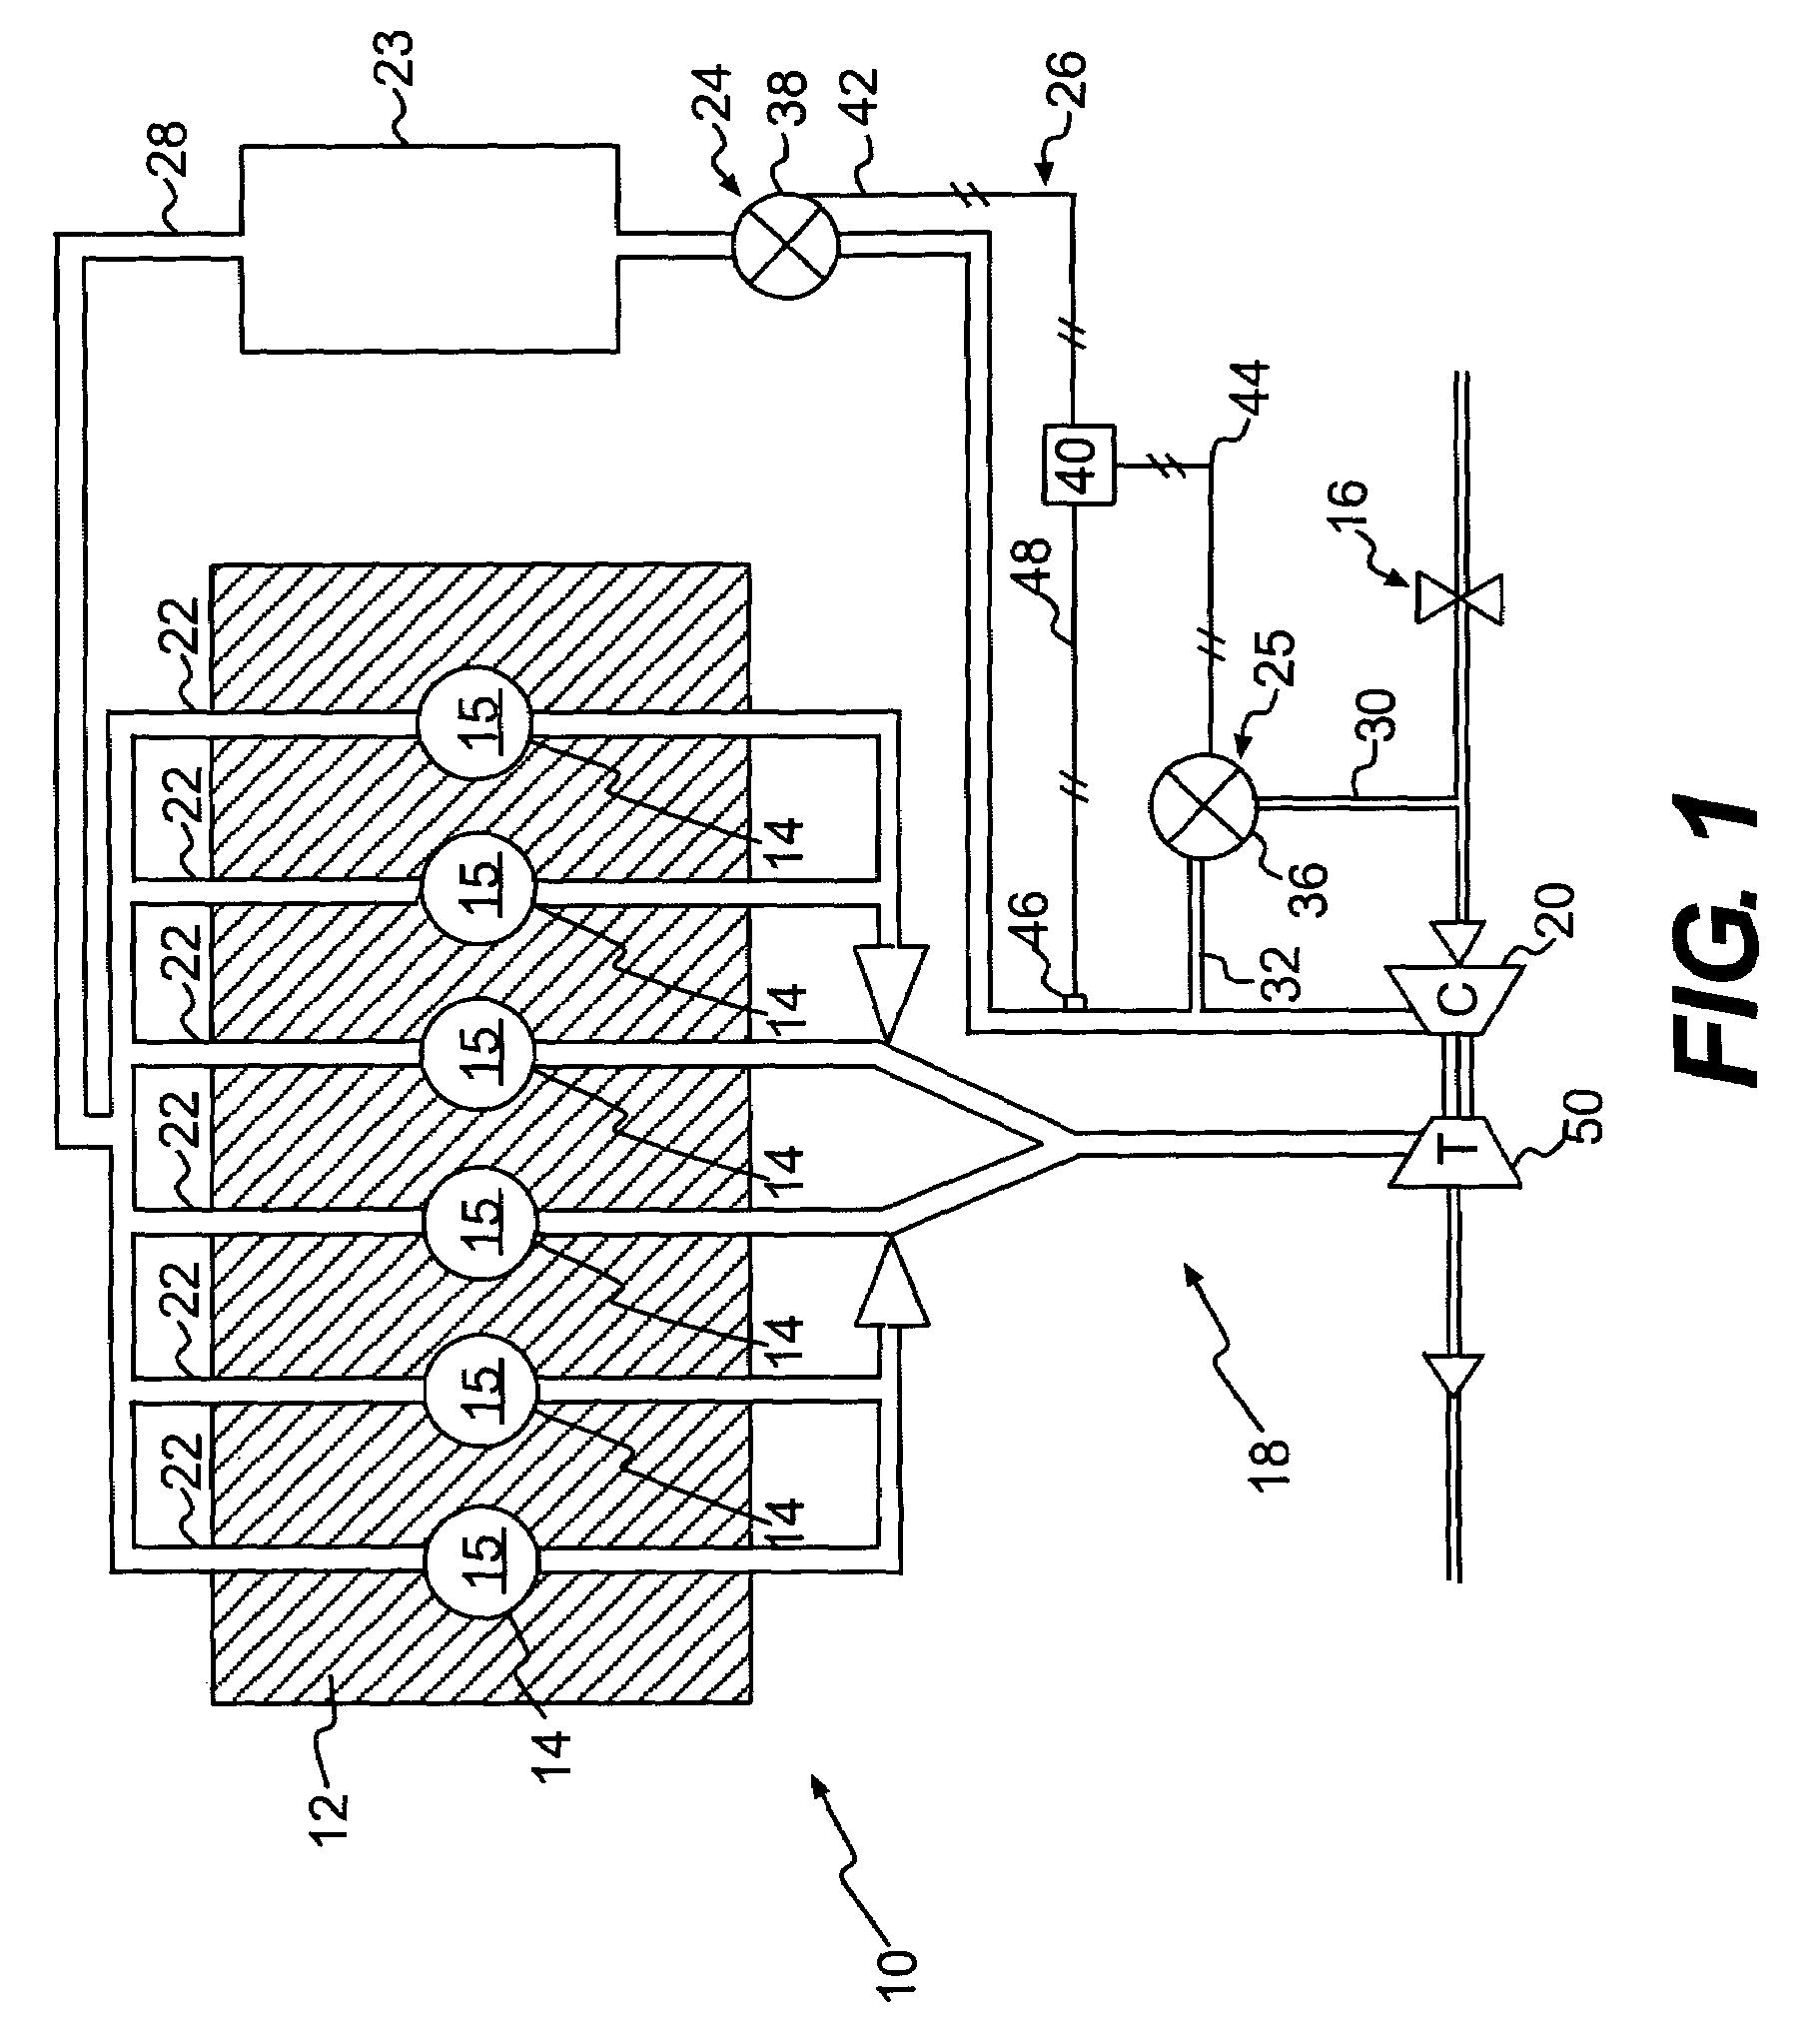 Air induction system having bypass flow control